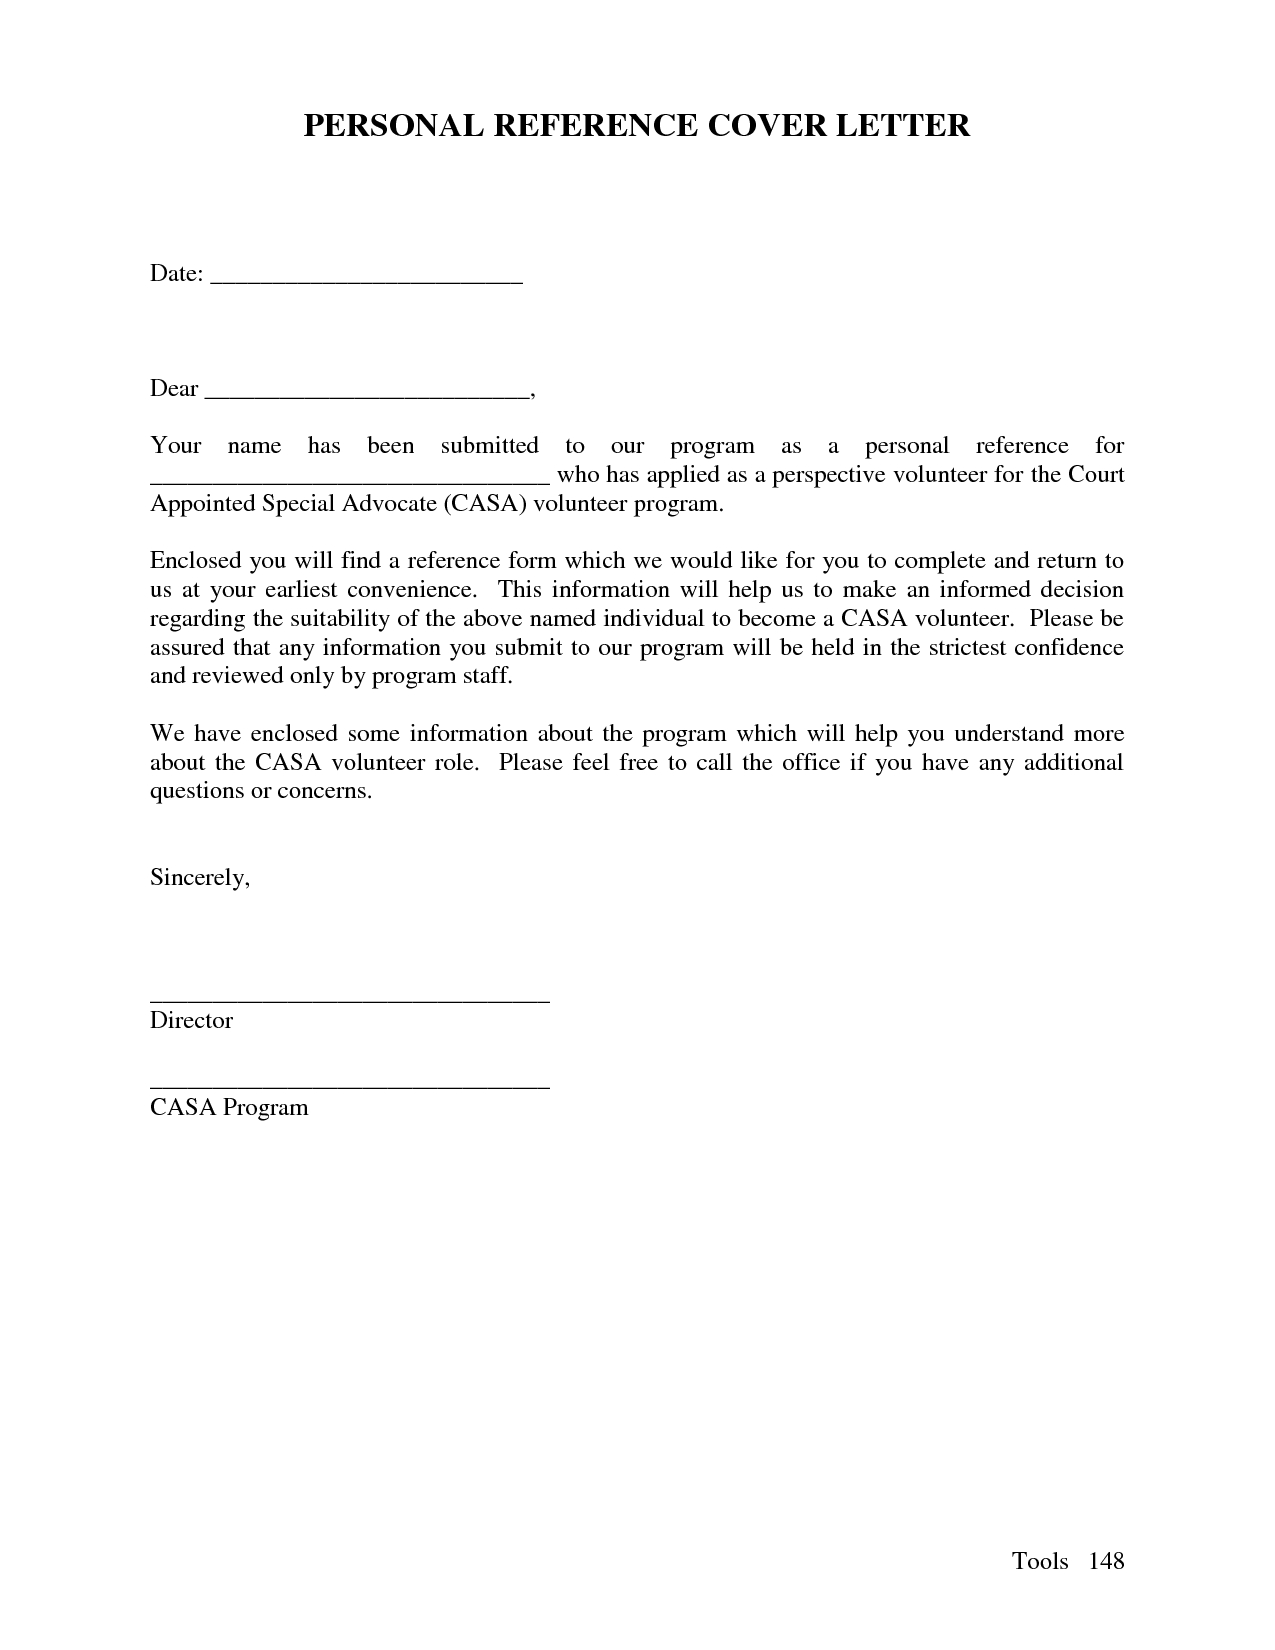 Personal Reference Cover Letter Chainimage throughout sizing 1275 X 1650